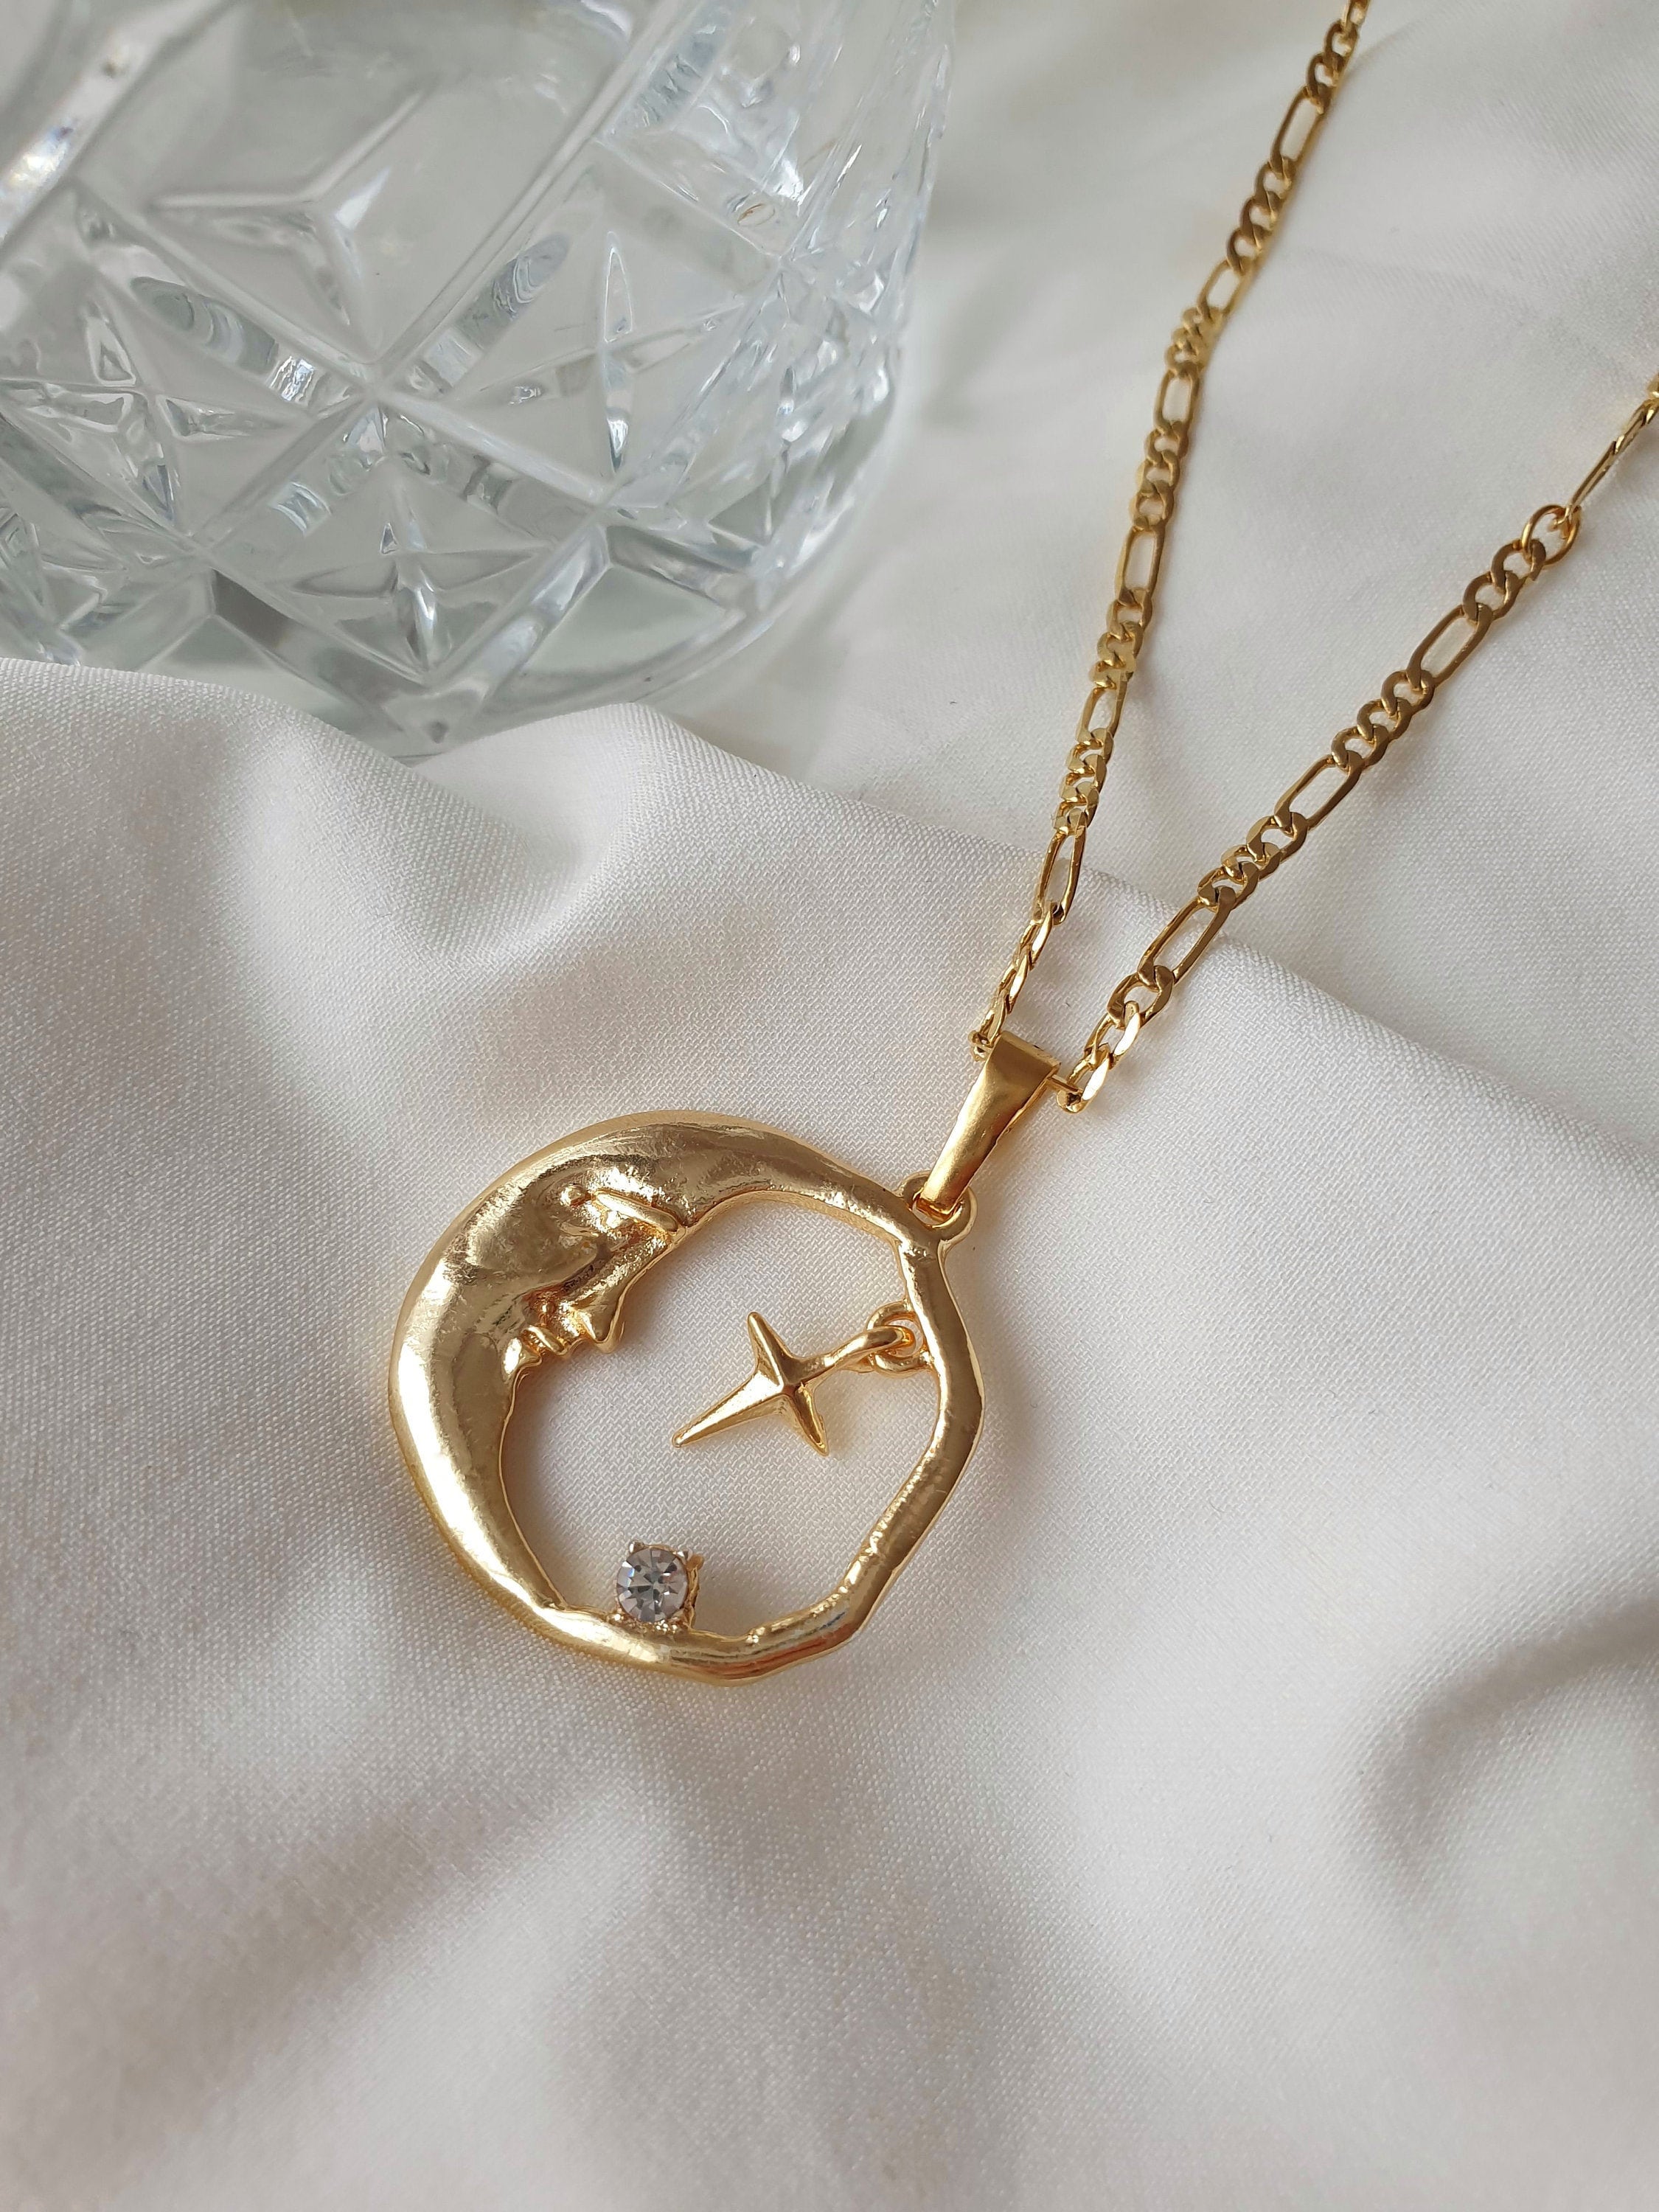 New Trendy Alloy Cute Elegant Wish Blue Star Moon Planet Gold Color Choker  Pendant Necklaces for Women Fashion Jewelry Dropship